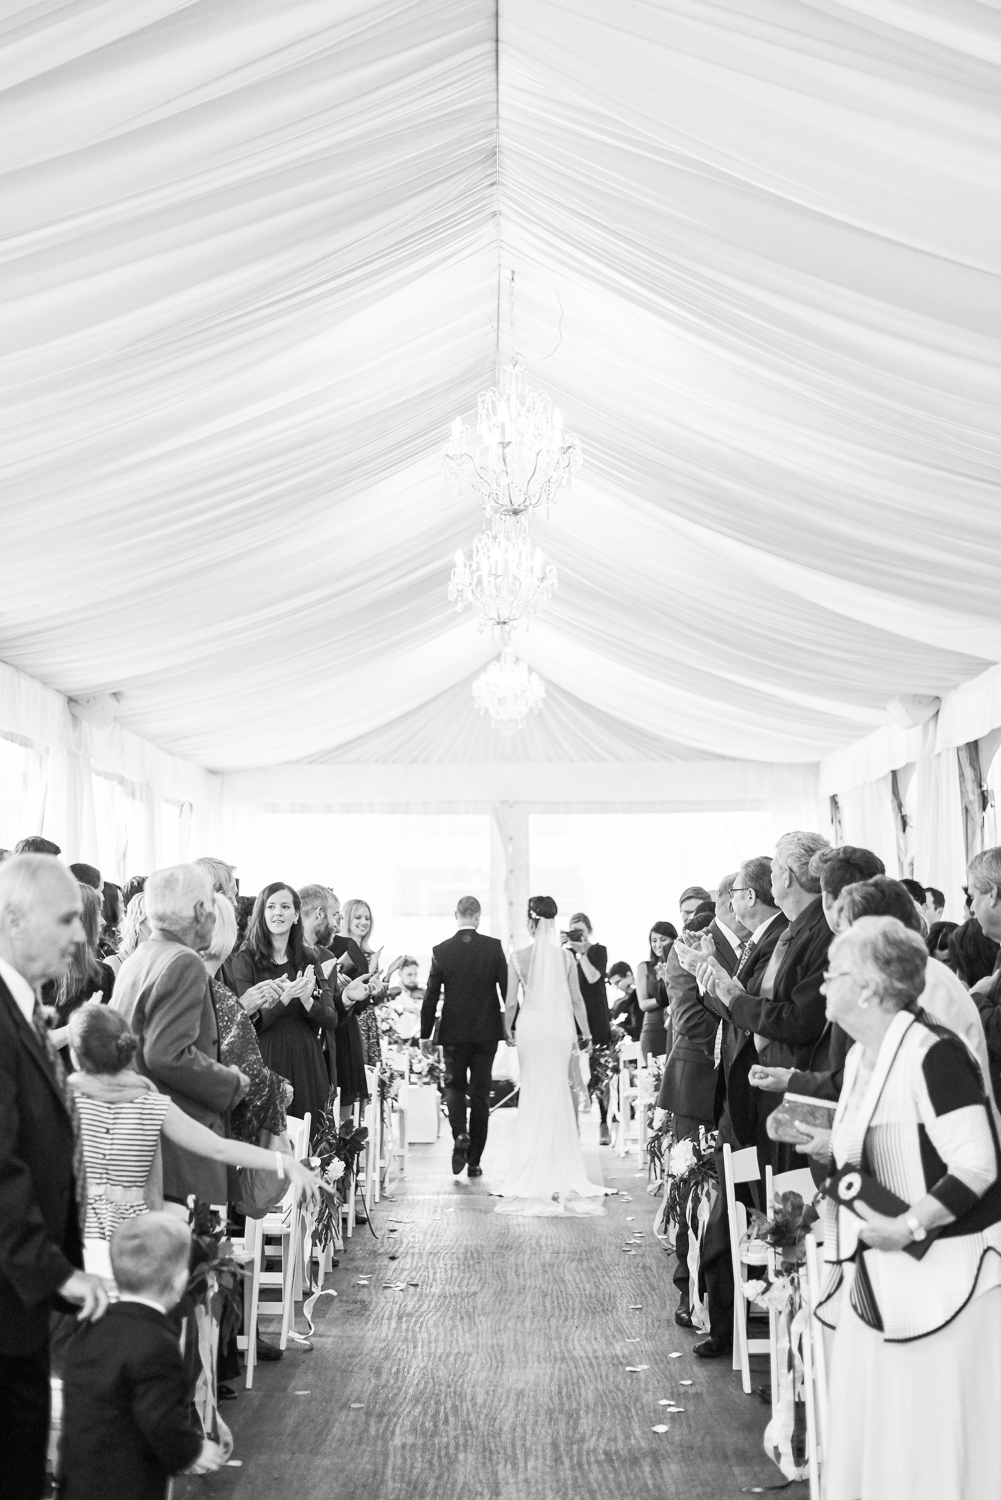 the recessional